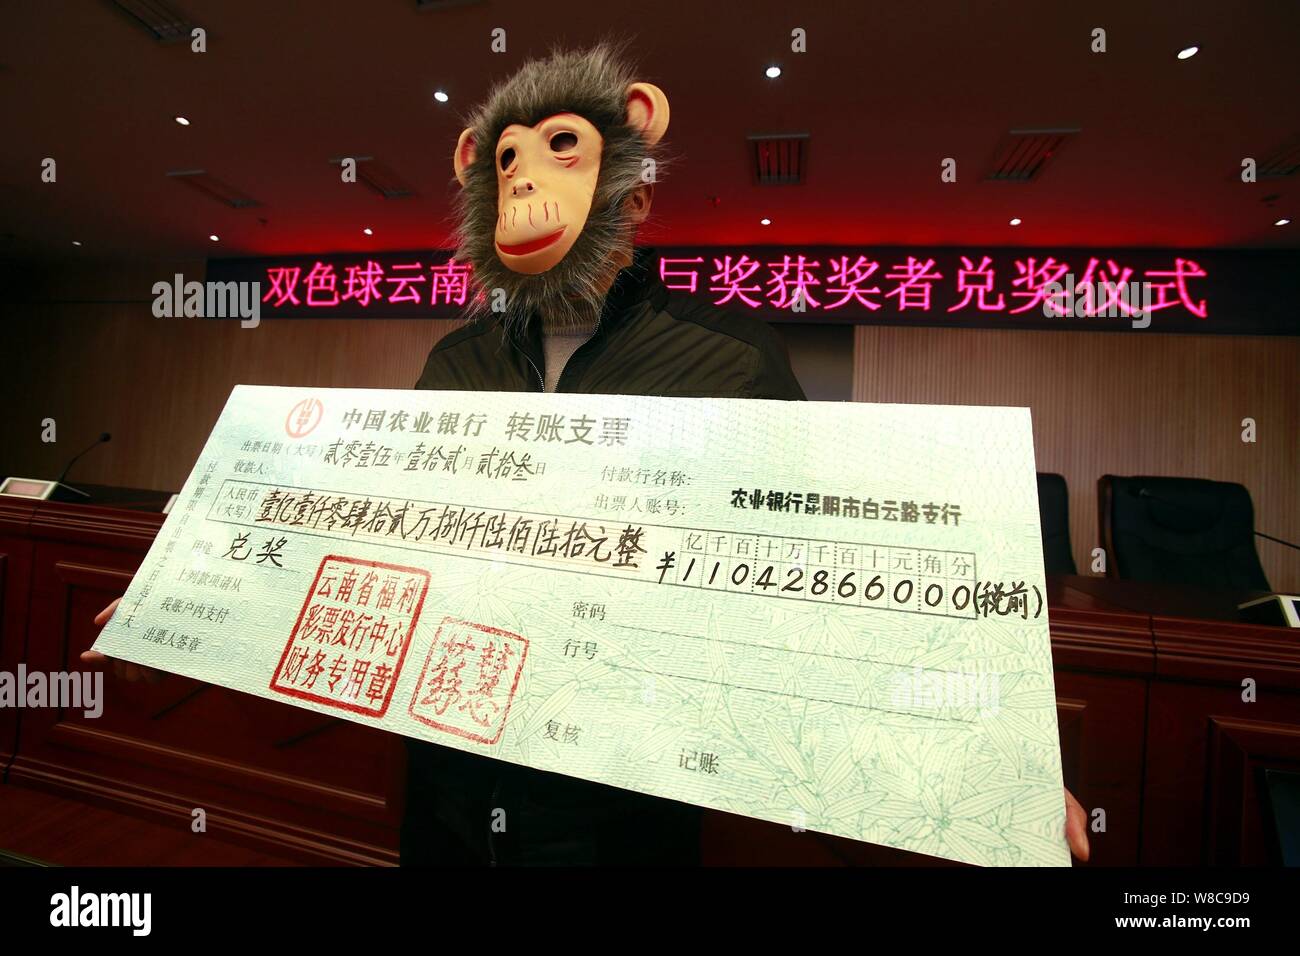 Morgen komplikationer generøsitet The 110 million yuan ($17 million lottery winner wearing a monkey face mask  poses with his check during a ceremony at a lottery center in Kunming city  Stock Photo - Alamy